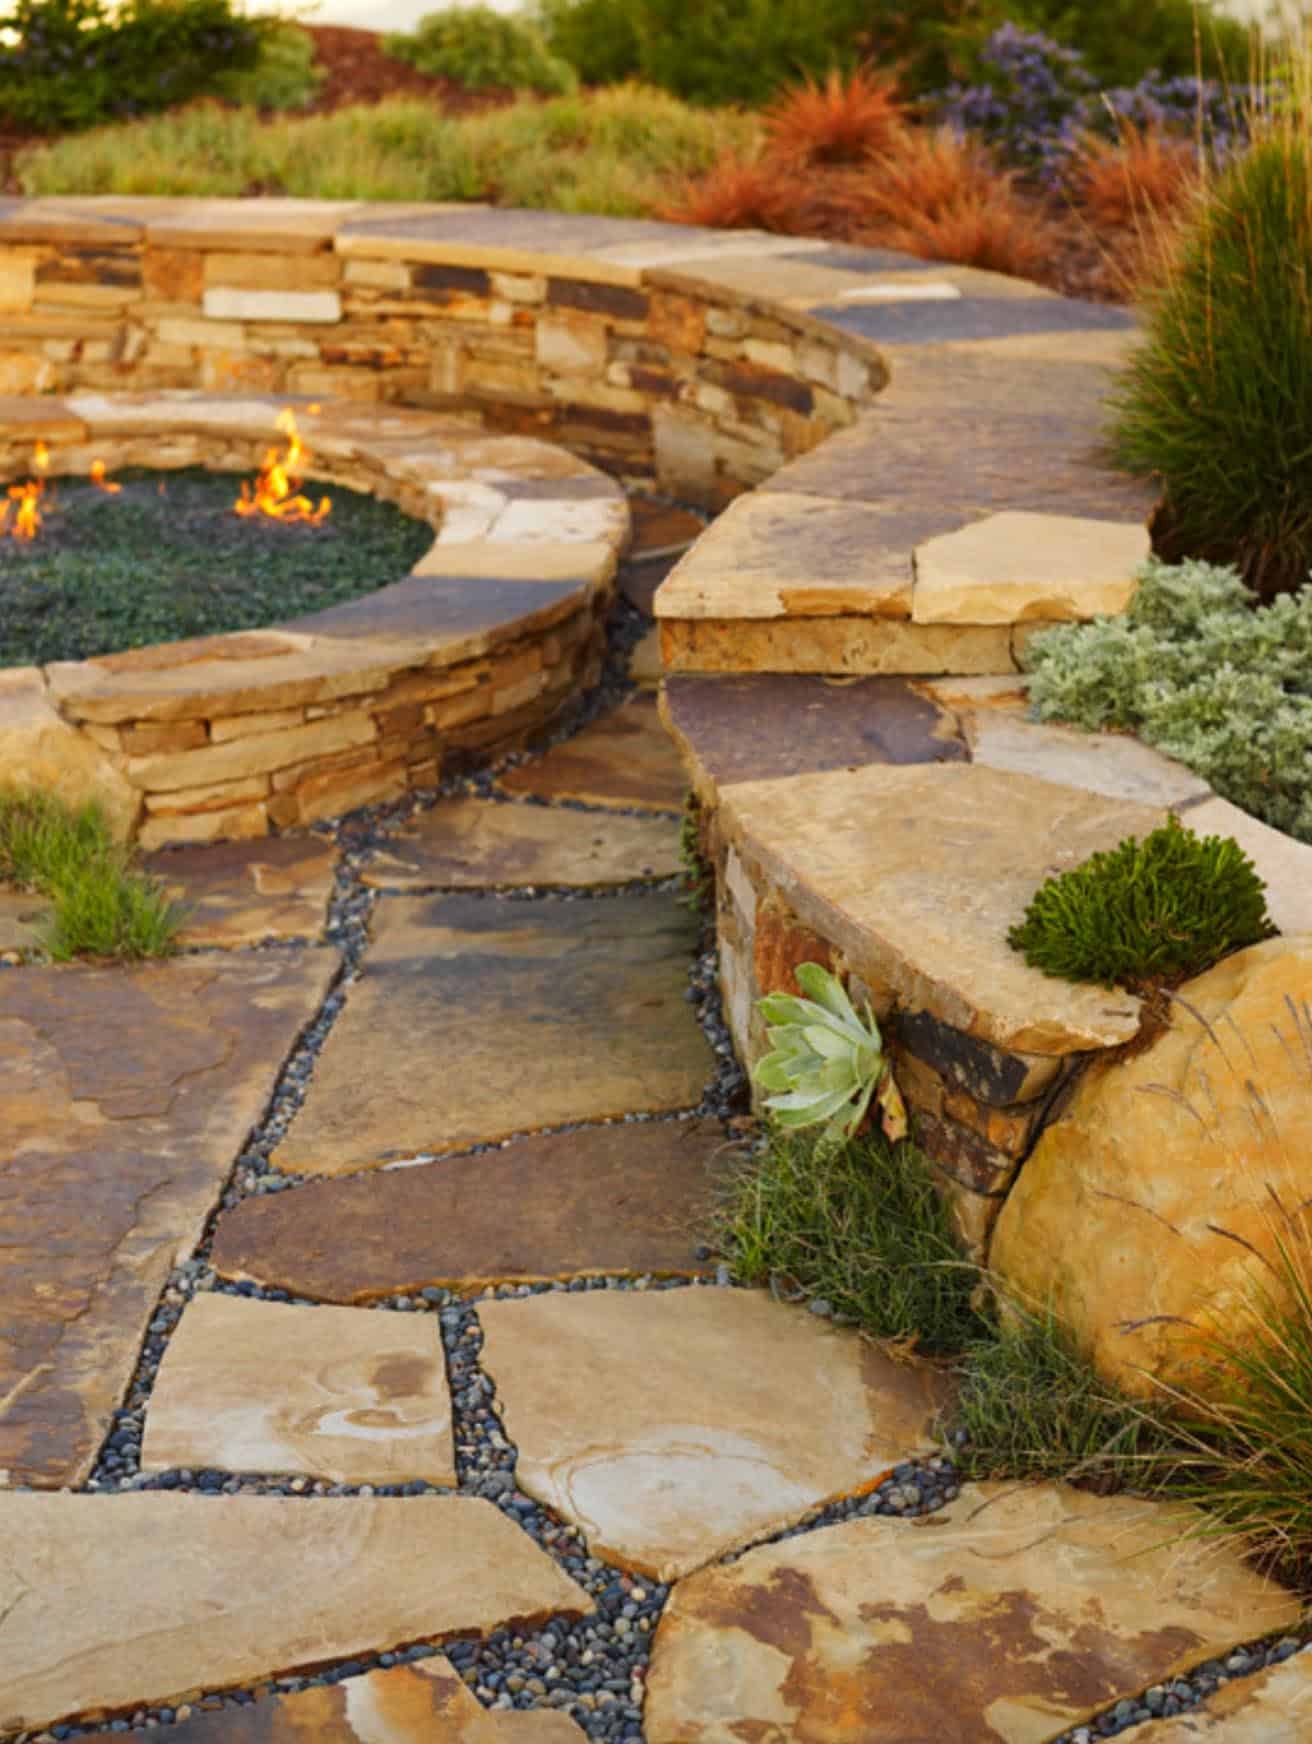 coastal-style-outdoor-design-ideas-with-fire-pit